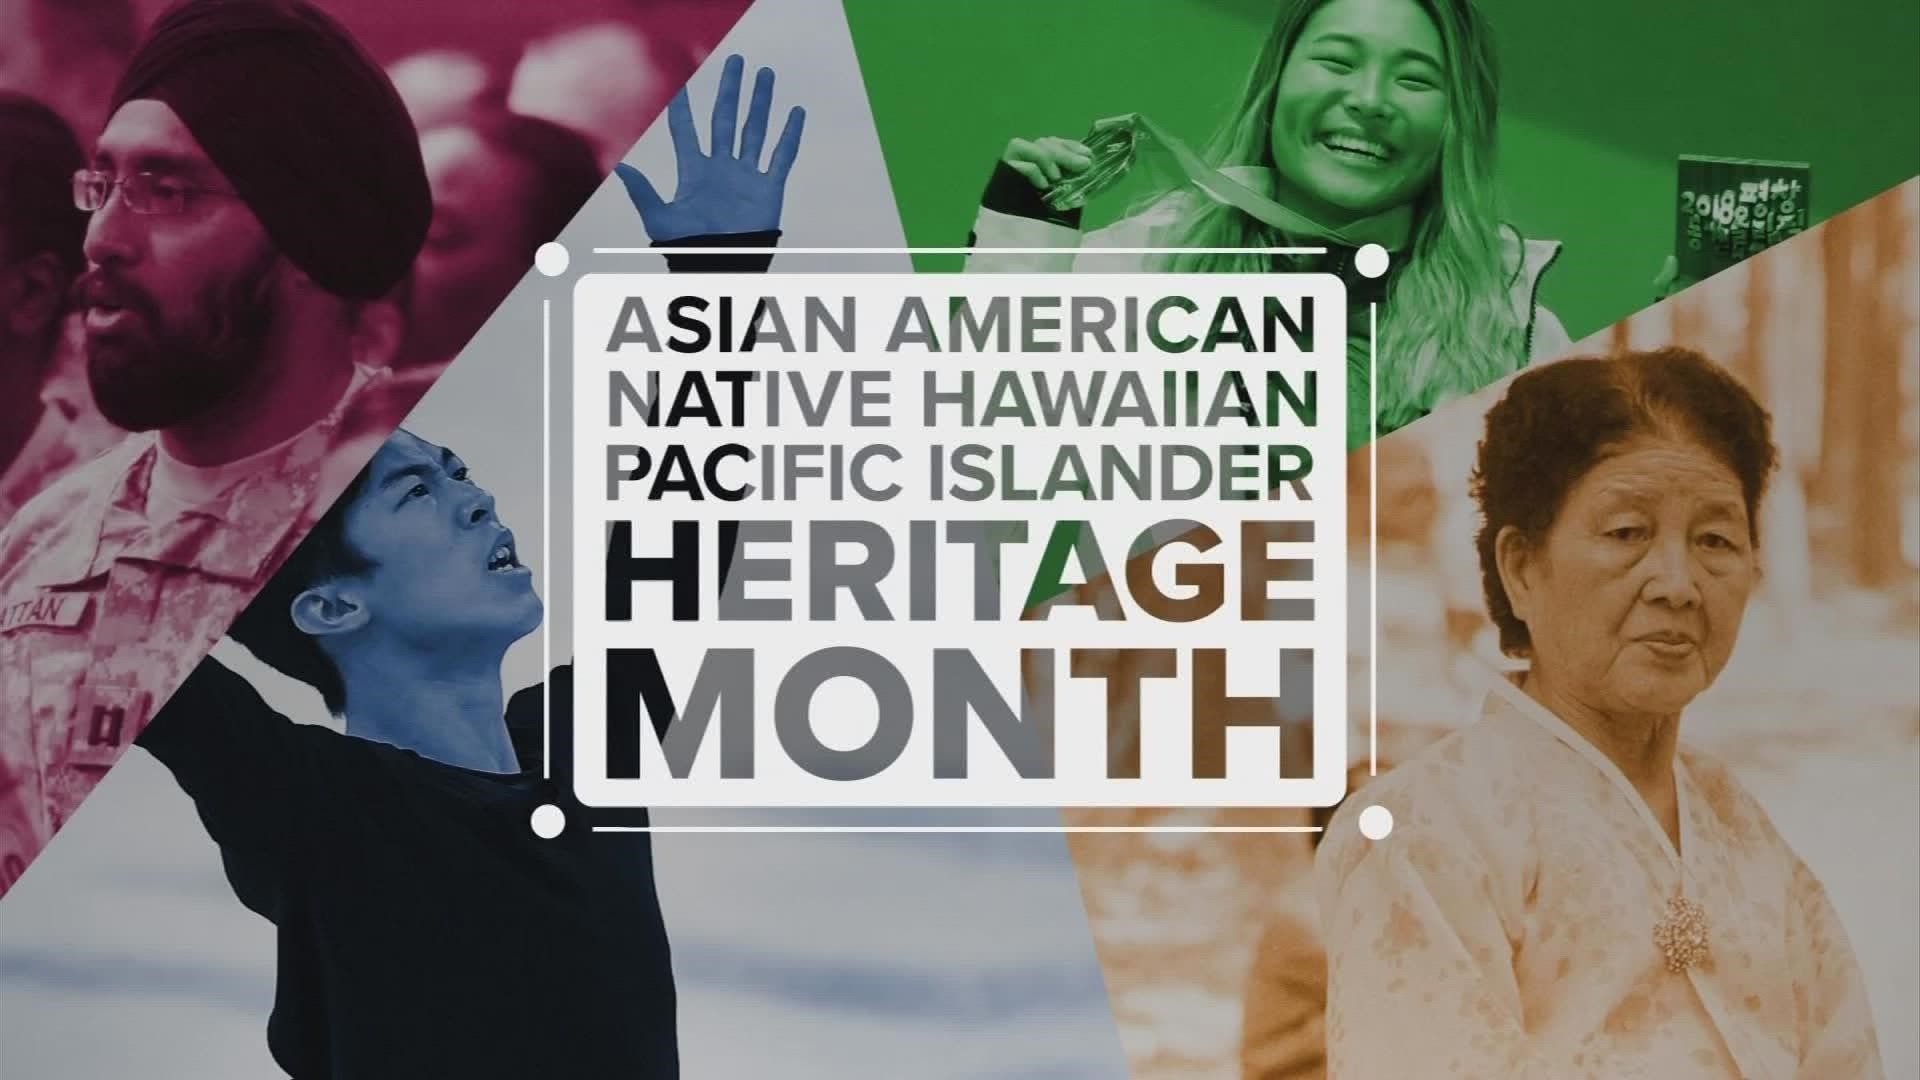 Paul Keels from 97.1 The Fan explains why he celebrates AAPI Heritage Month.